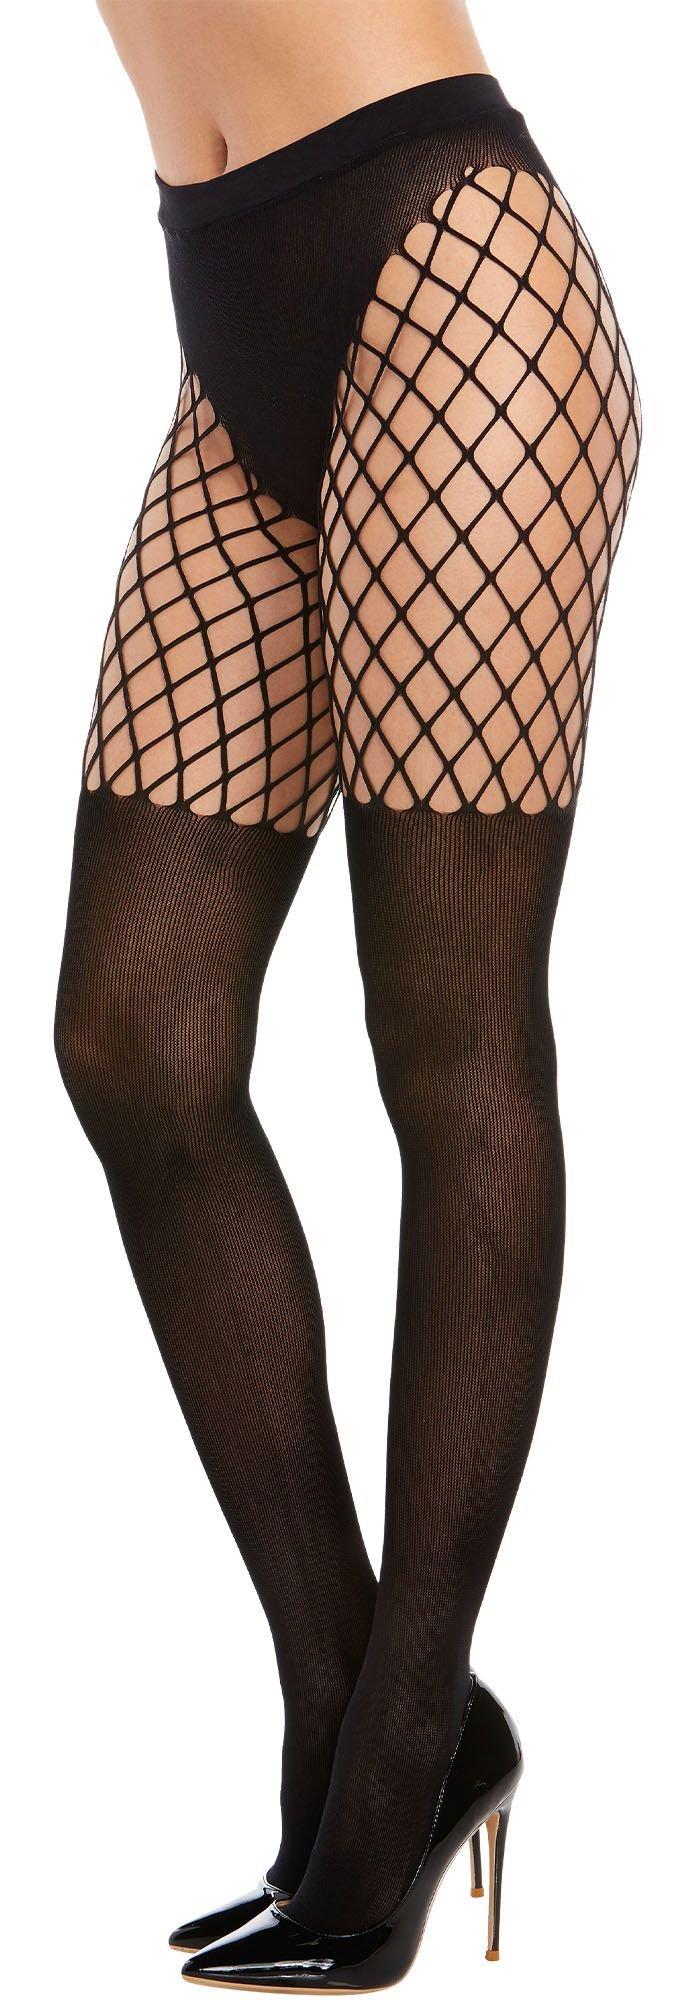  SATINIOR 3 Pairs Women's Fishnet High Waist Fishnet Patterned  Tights Dark Fishnet Stockings Opaque Pantyhose for Women, Black (Butterfly  Style) : Clothing, Shoes & Jewelry